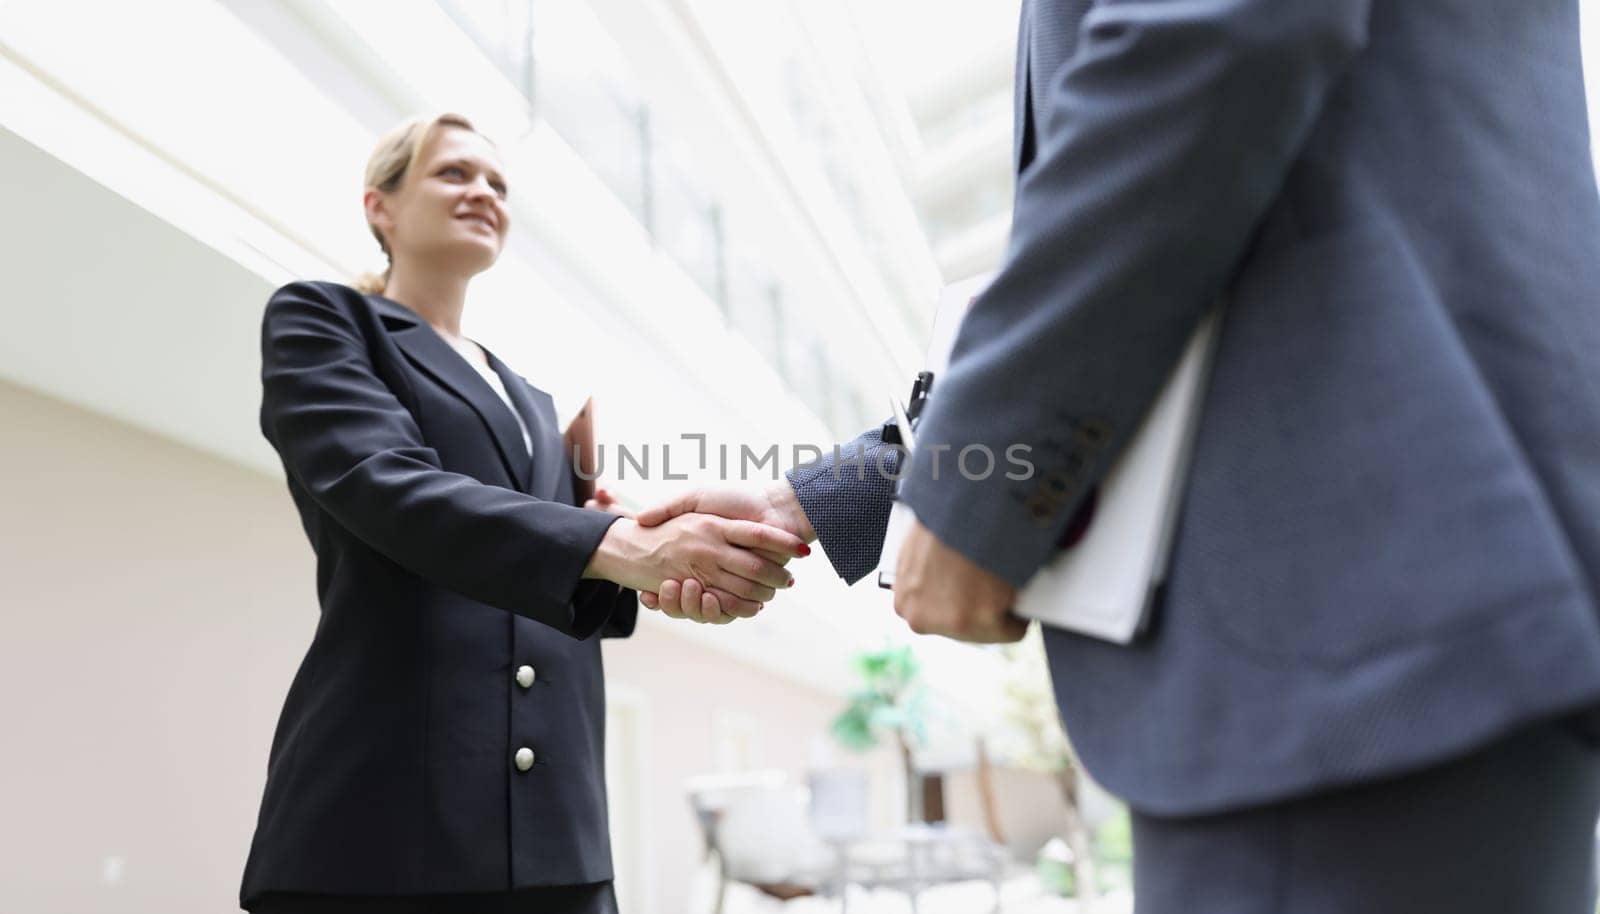 Businessmen in suits shaking hands in the lobby of the building, blurry. Business decisions concept, support gender equality tend